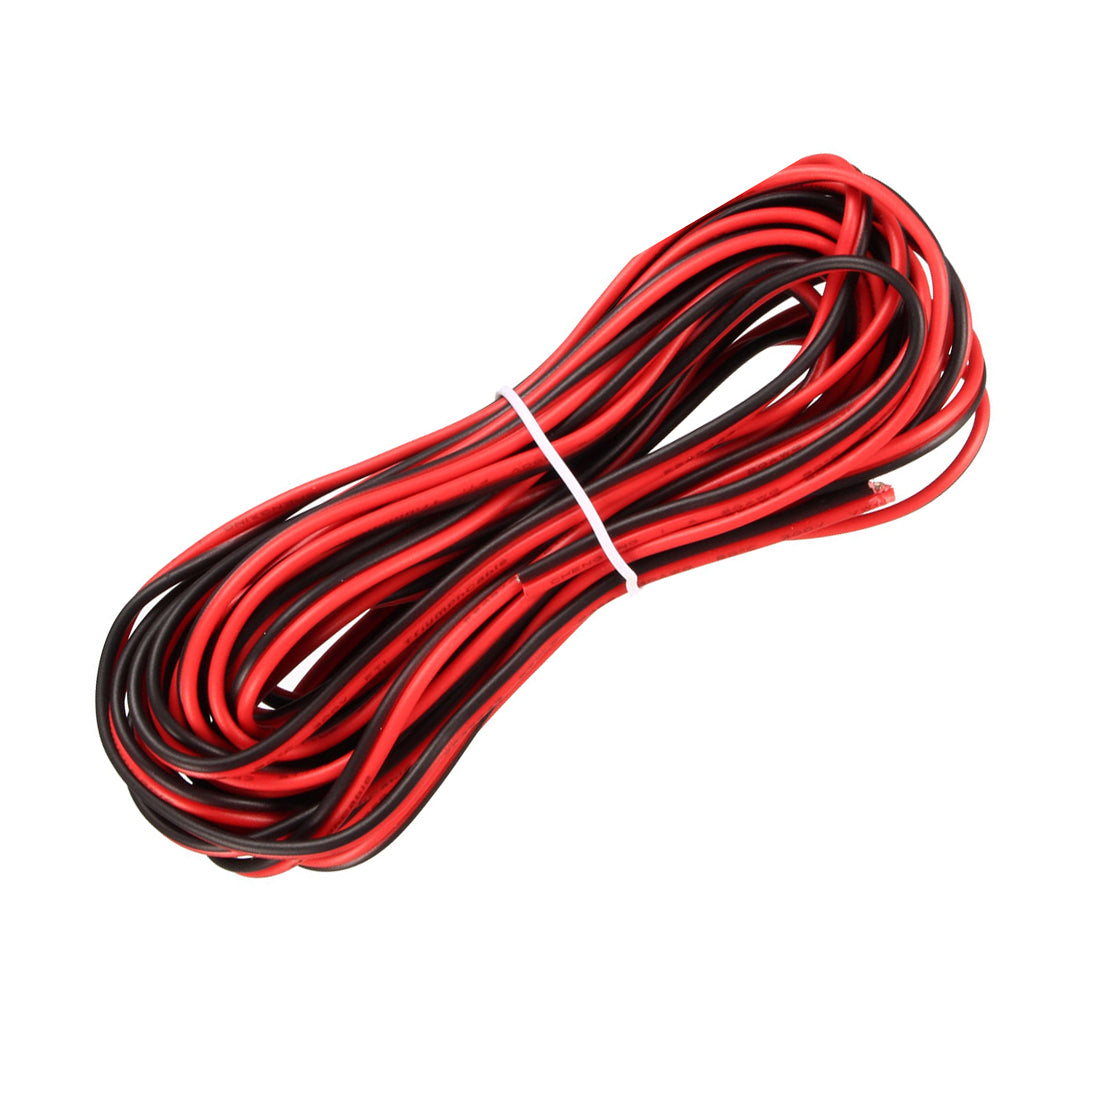 uxcell Uxcell Red Black Wire 2pin Extension Cable Cord 20 AWG Parallel Wire Tin Plated Copper 6M Length for LED Strip Light